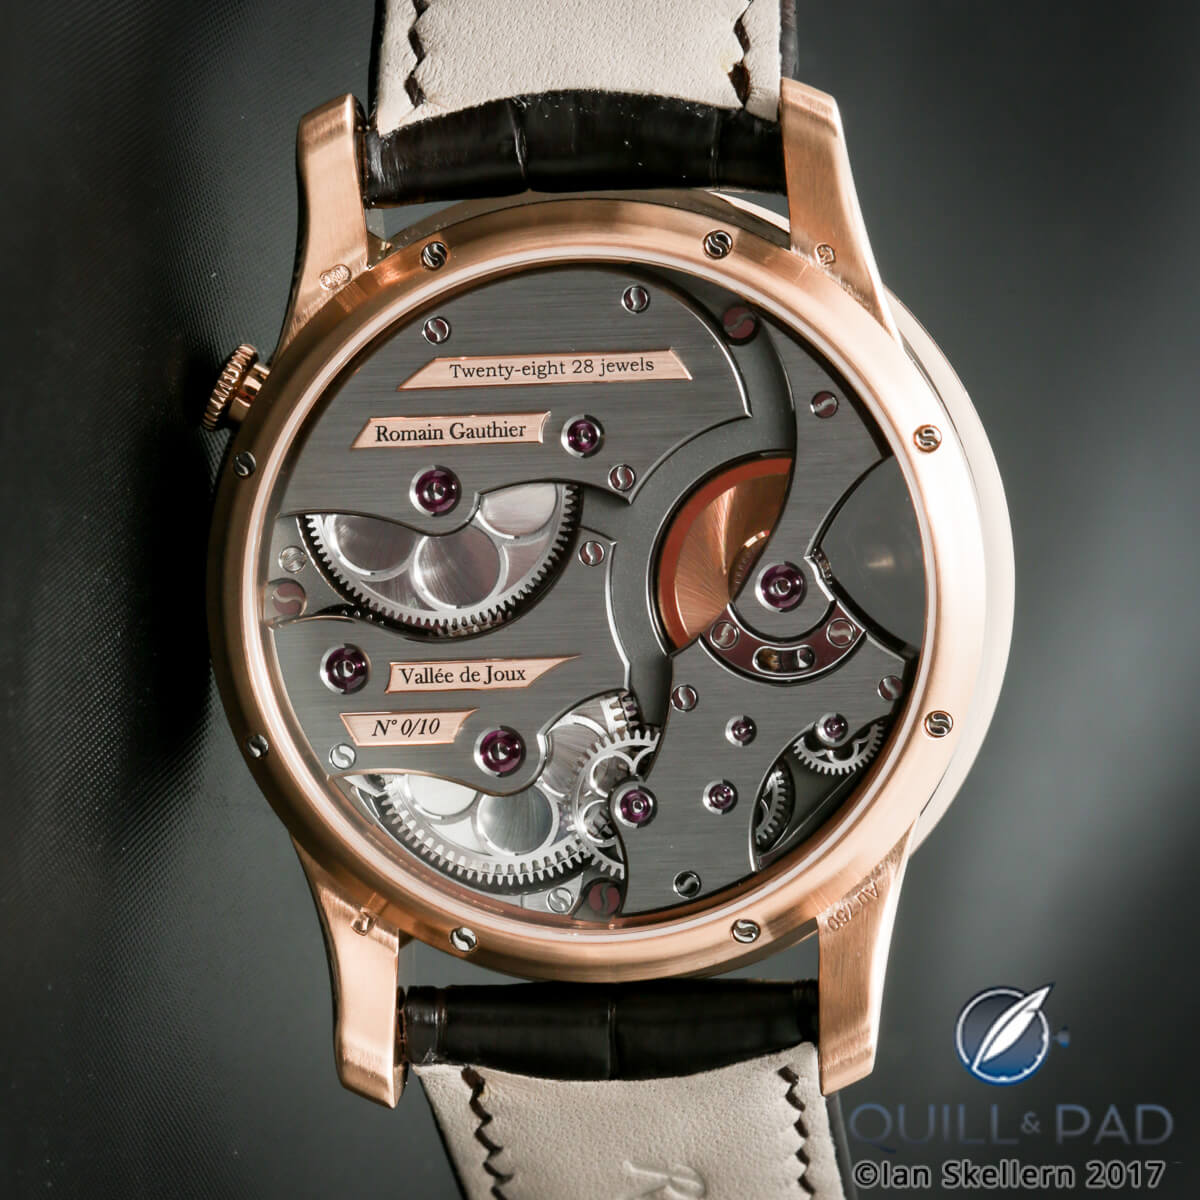 View through the display back of the Romain Gauthier Insight Micro-Rotor in red gold